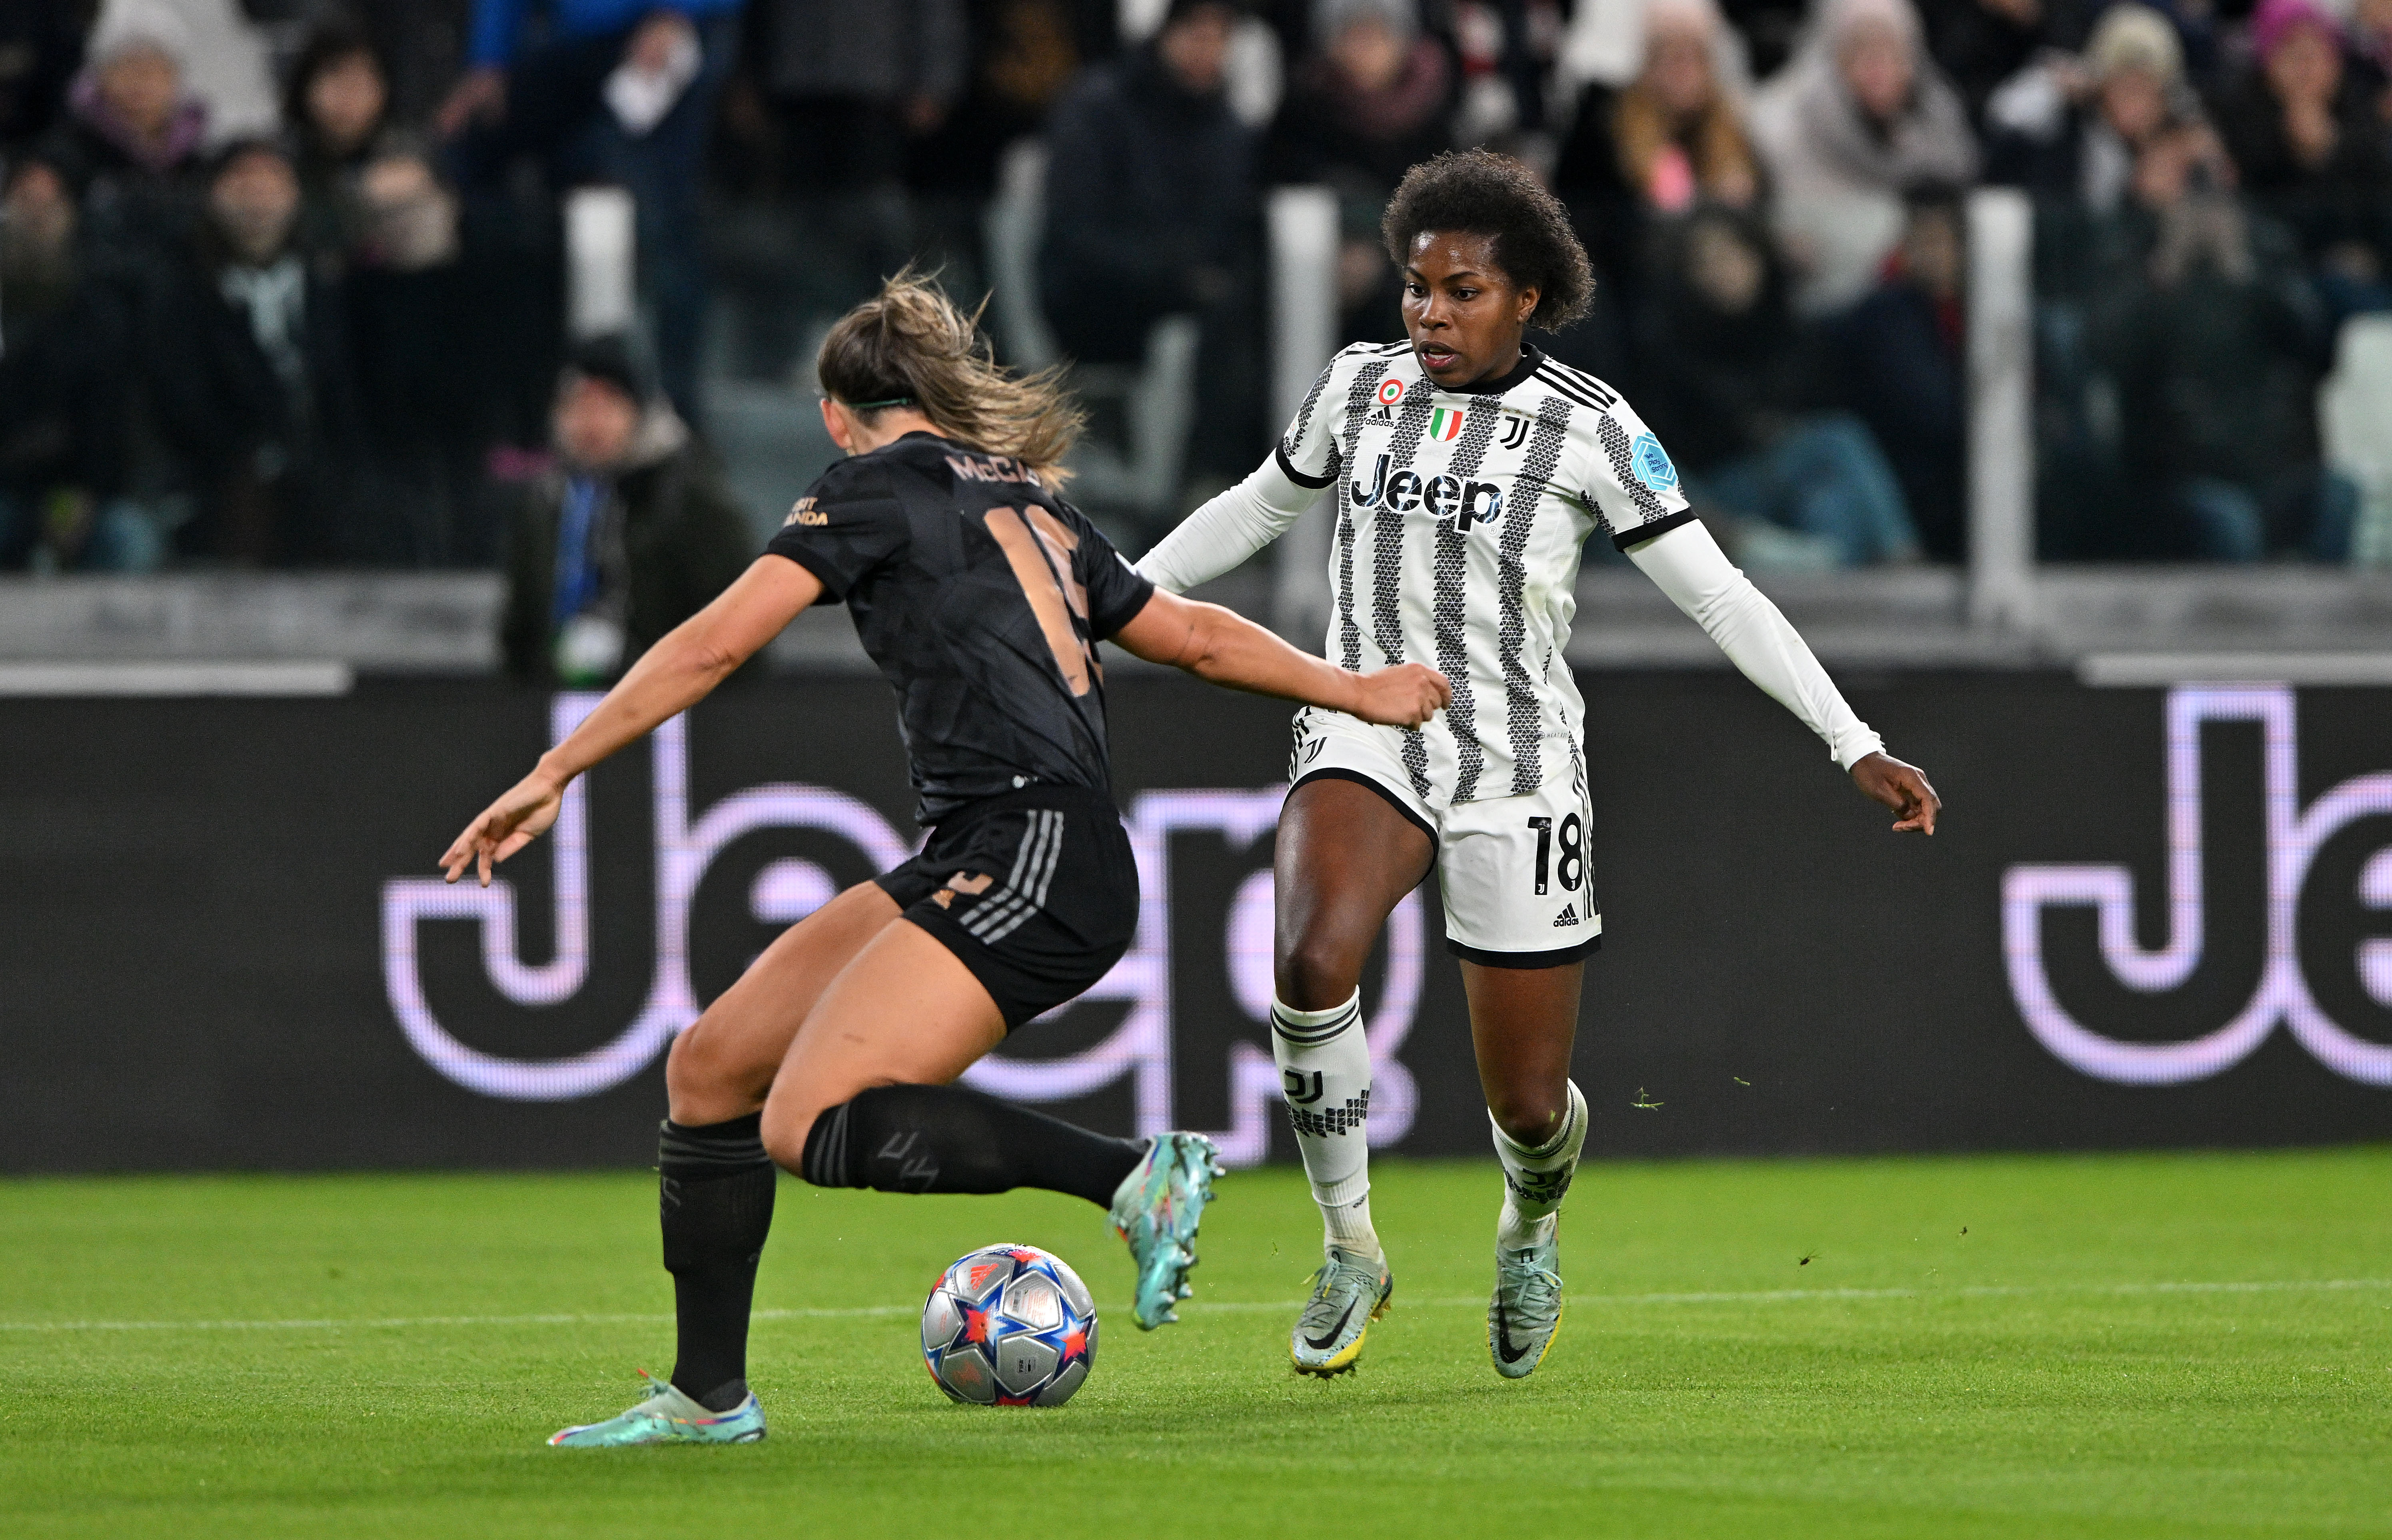 , Juventus 1 Arsenal 1: Miedema nets as Gunners stay top of Champions League group by denying Juve a win in Turin